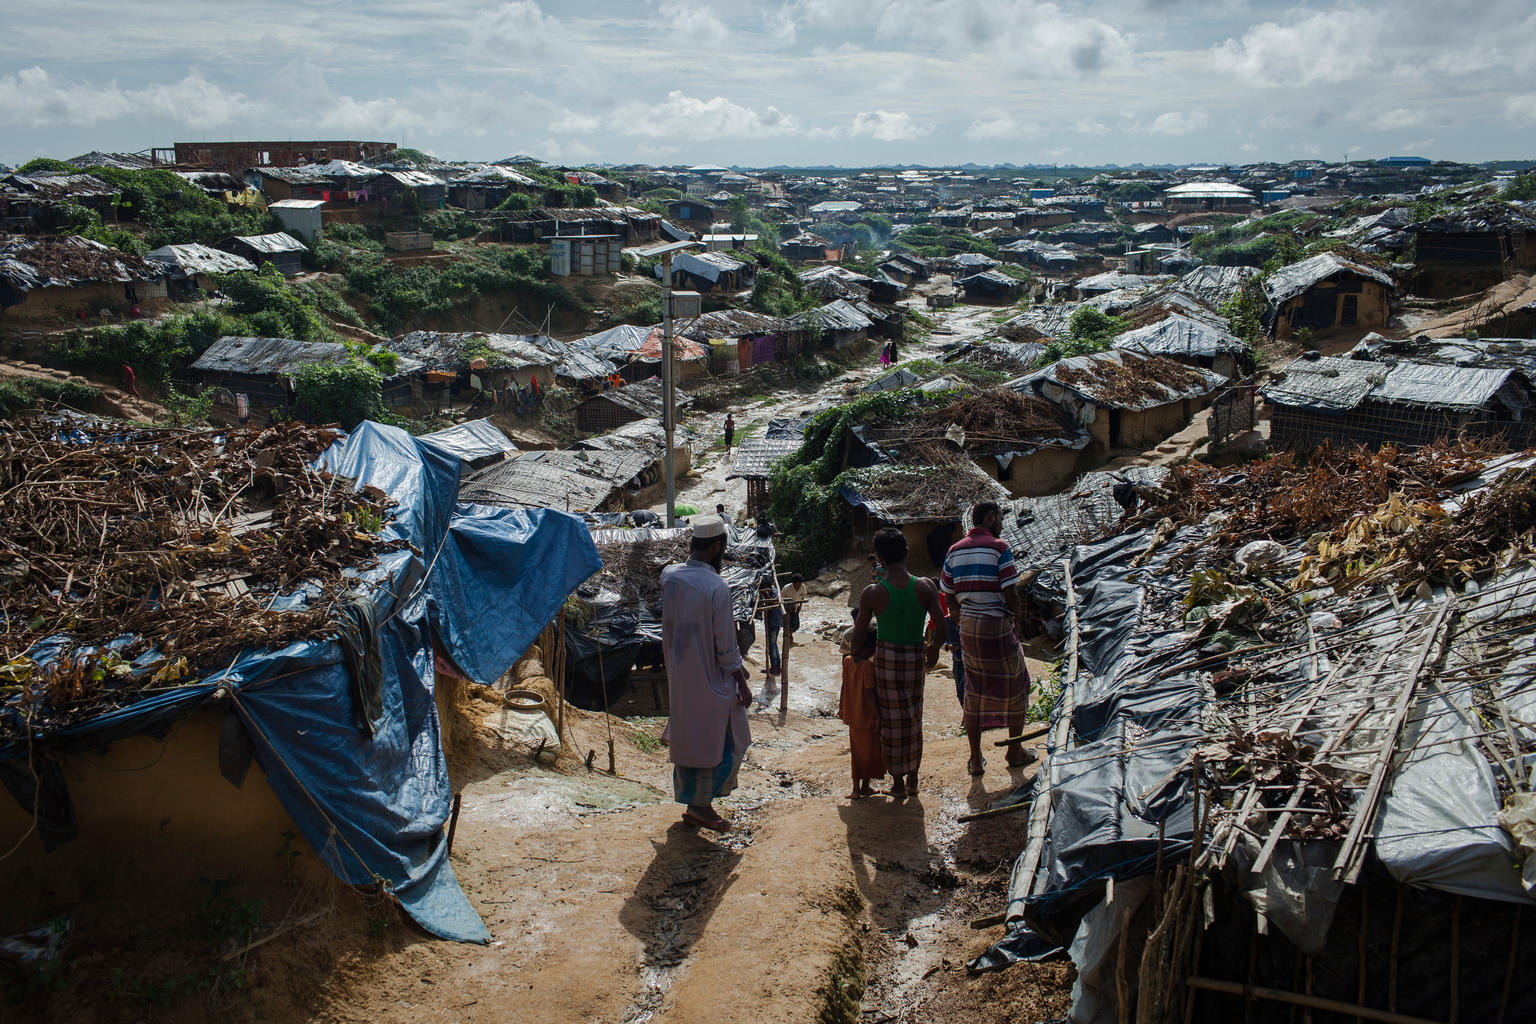 On 8 September 2017 in Bangladesh, Rohingya refugees stand on a hill overlooking dwellings in the Kutupalong makeshift refugee camp, in Cox’s Bazar district.